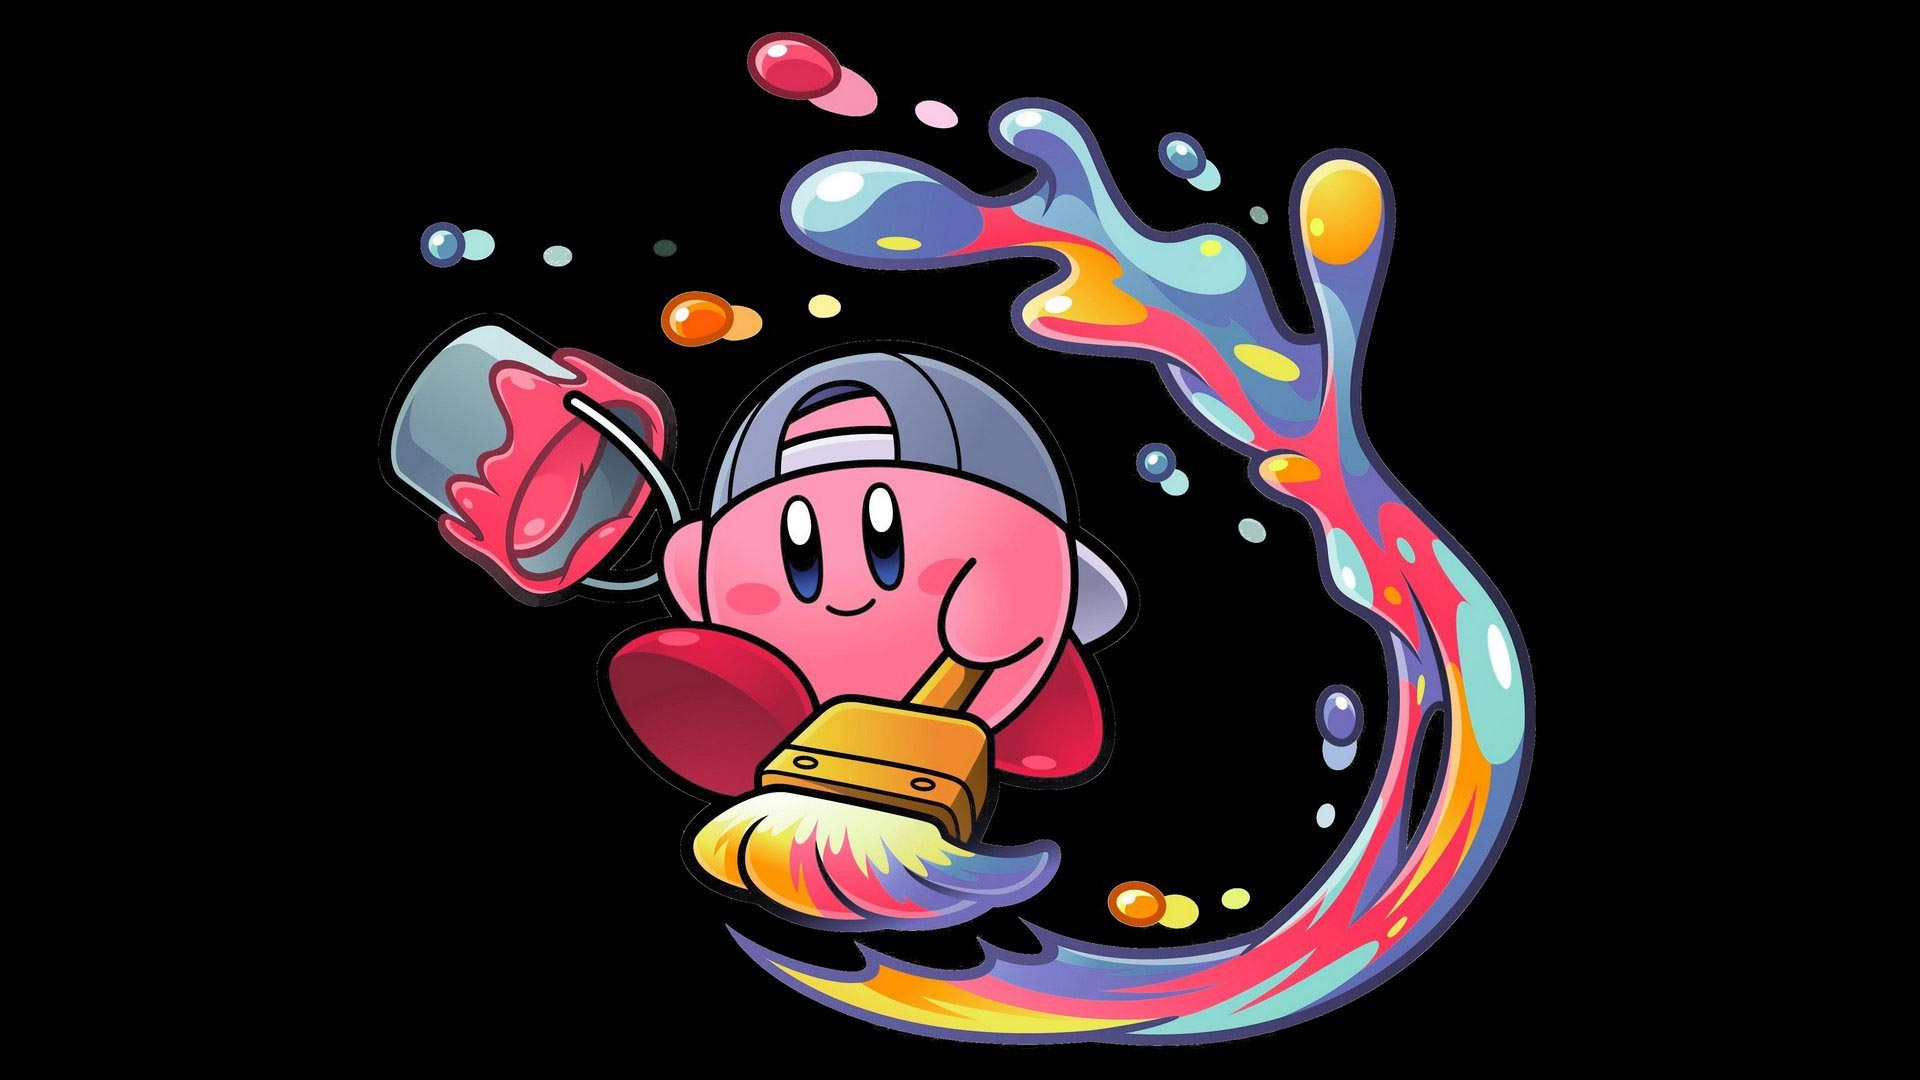 Happy Birthday Kirby Wallpapers Up For Download – NintendoSoup